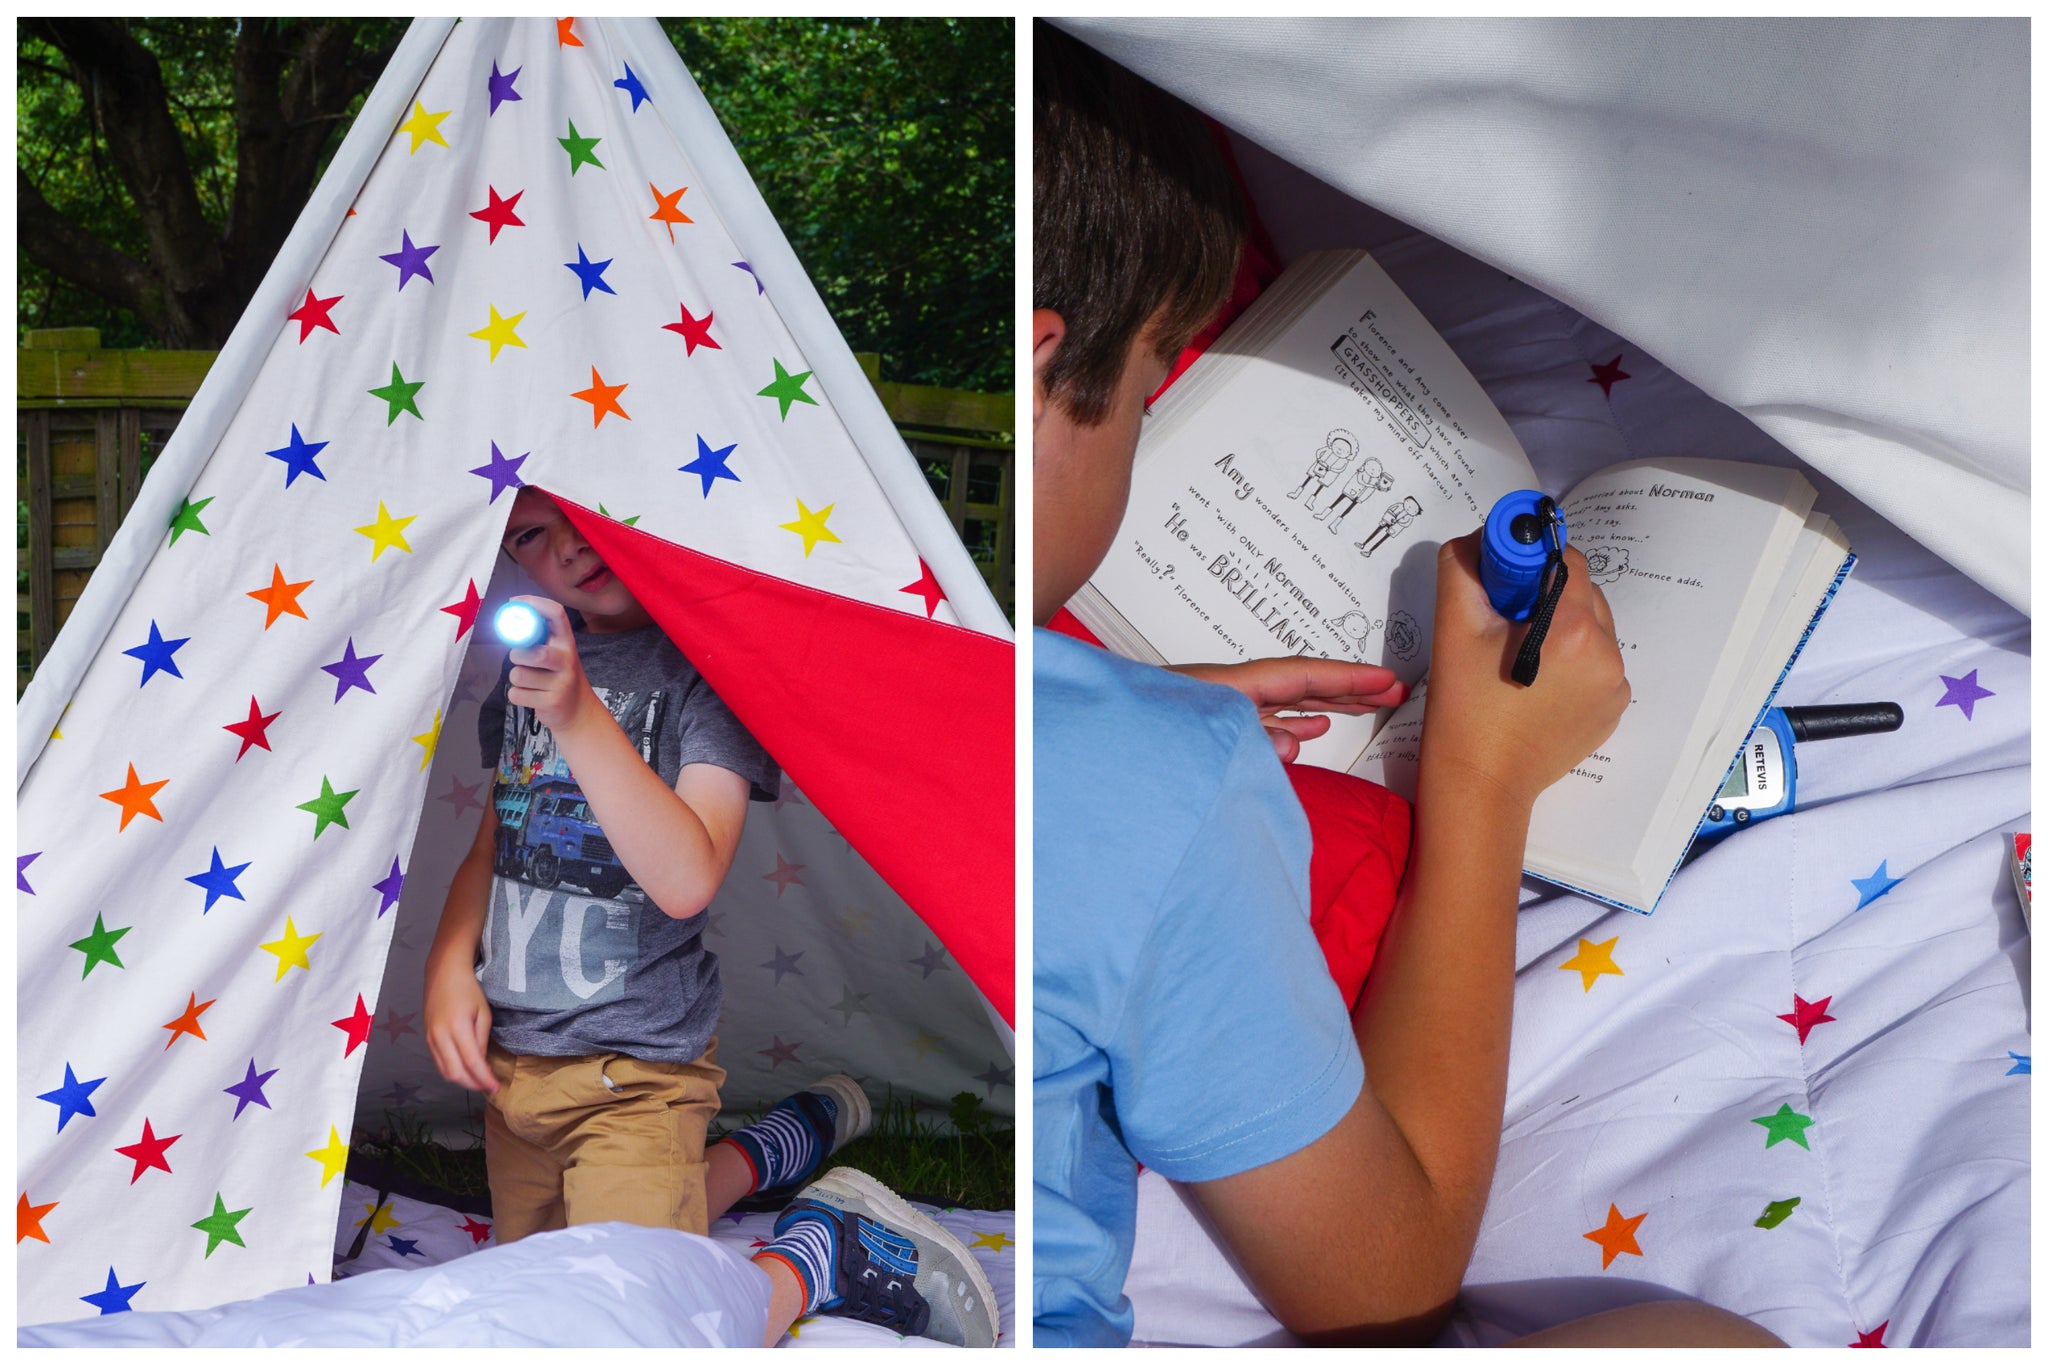 Ten things you need for the best ever summer camp for kids